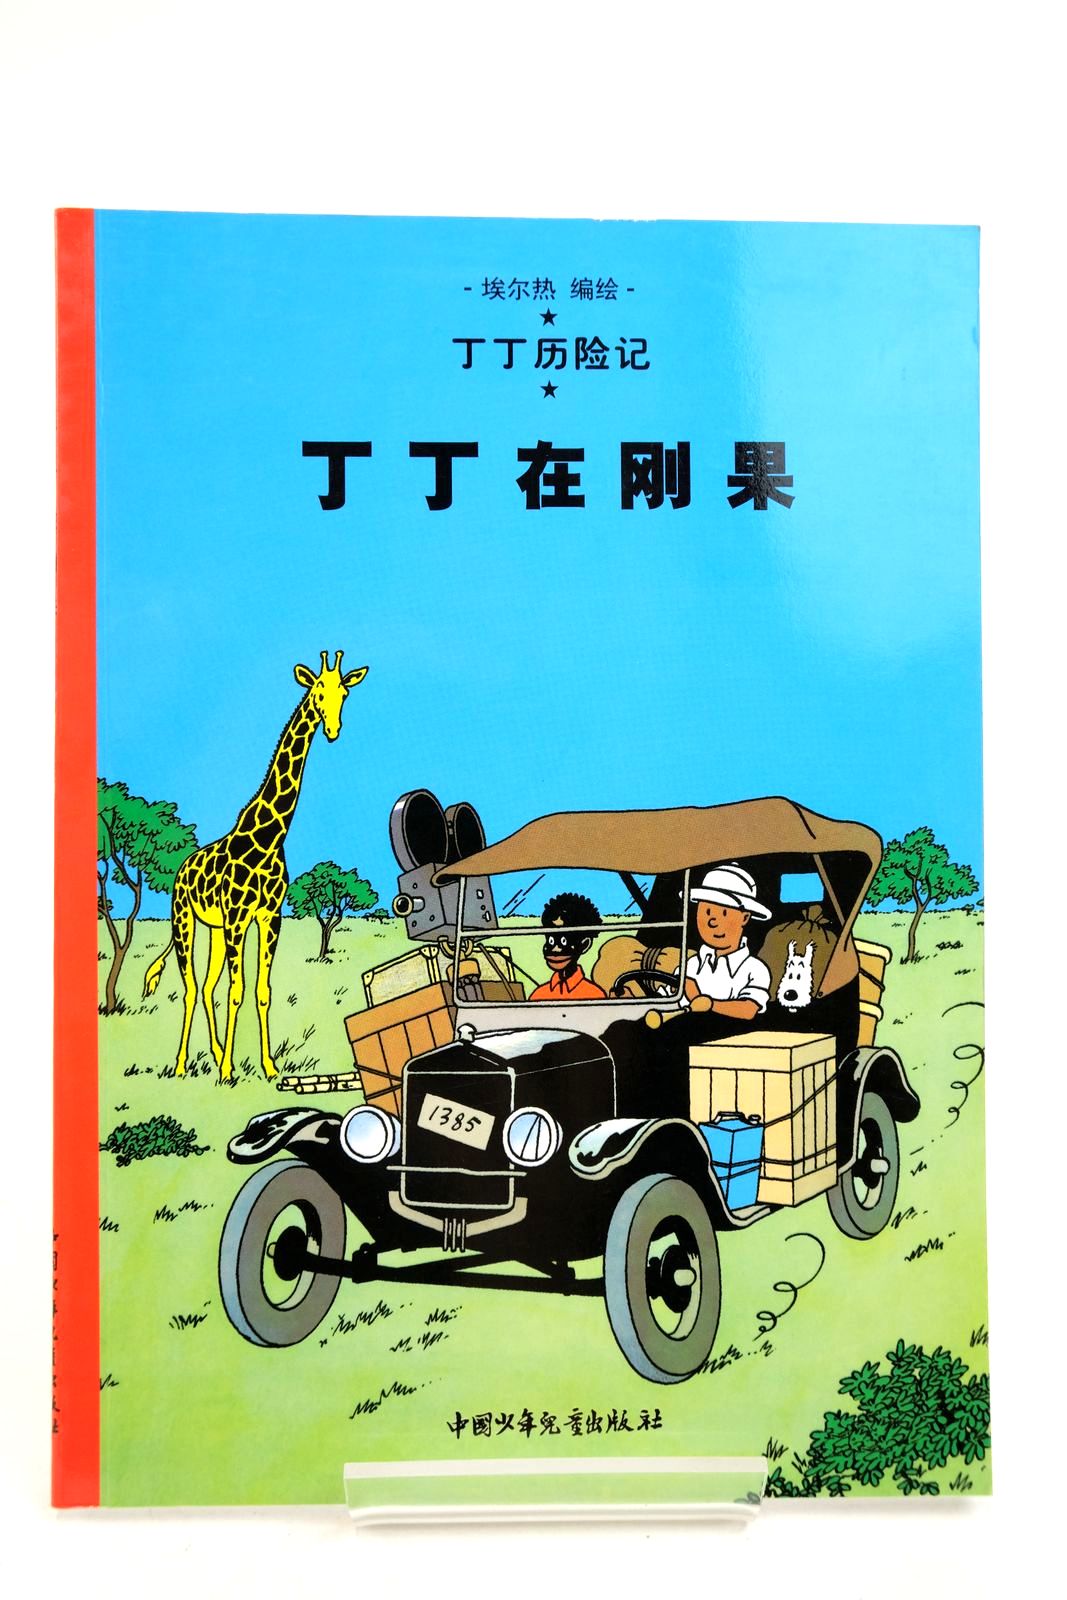 Photo of THE ADVENTURES OF TINTIN: TINTIN IN THE CONGO (CHINESE LANGUAGE EDITION) written by Herge, illustrated by Herge, published by China Press (STOCK CODE: 2140353)  for sale by Stella & Rose's Books